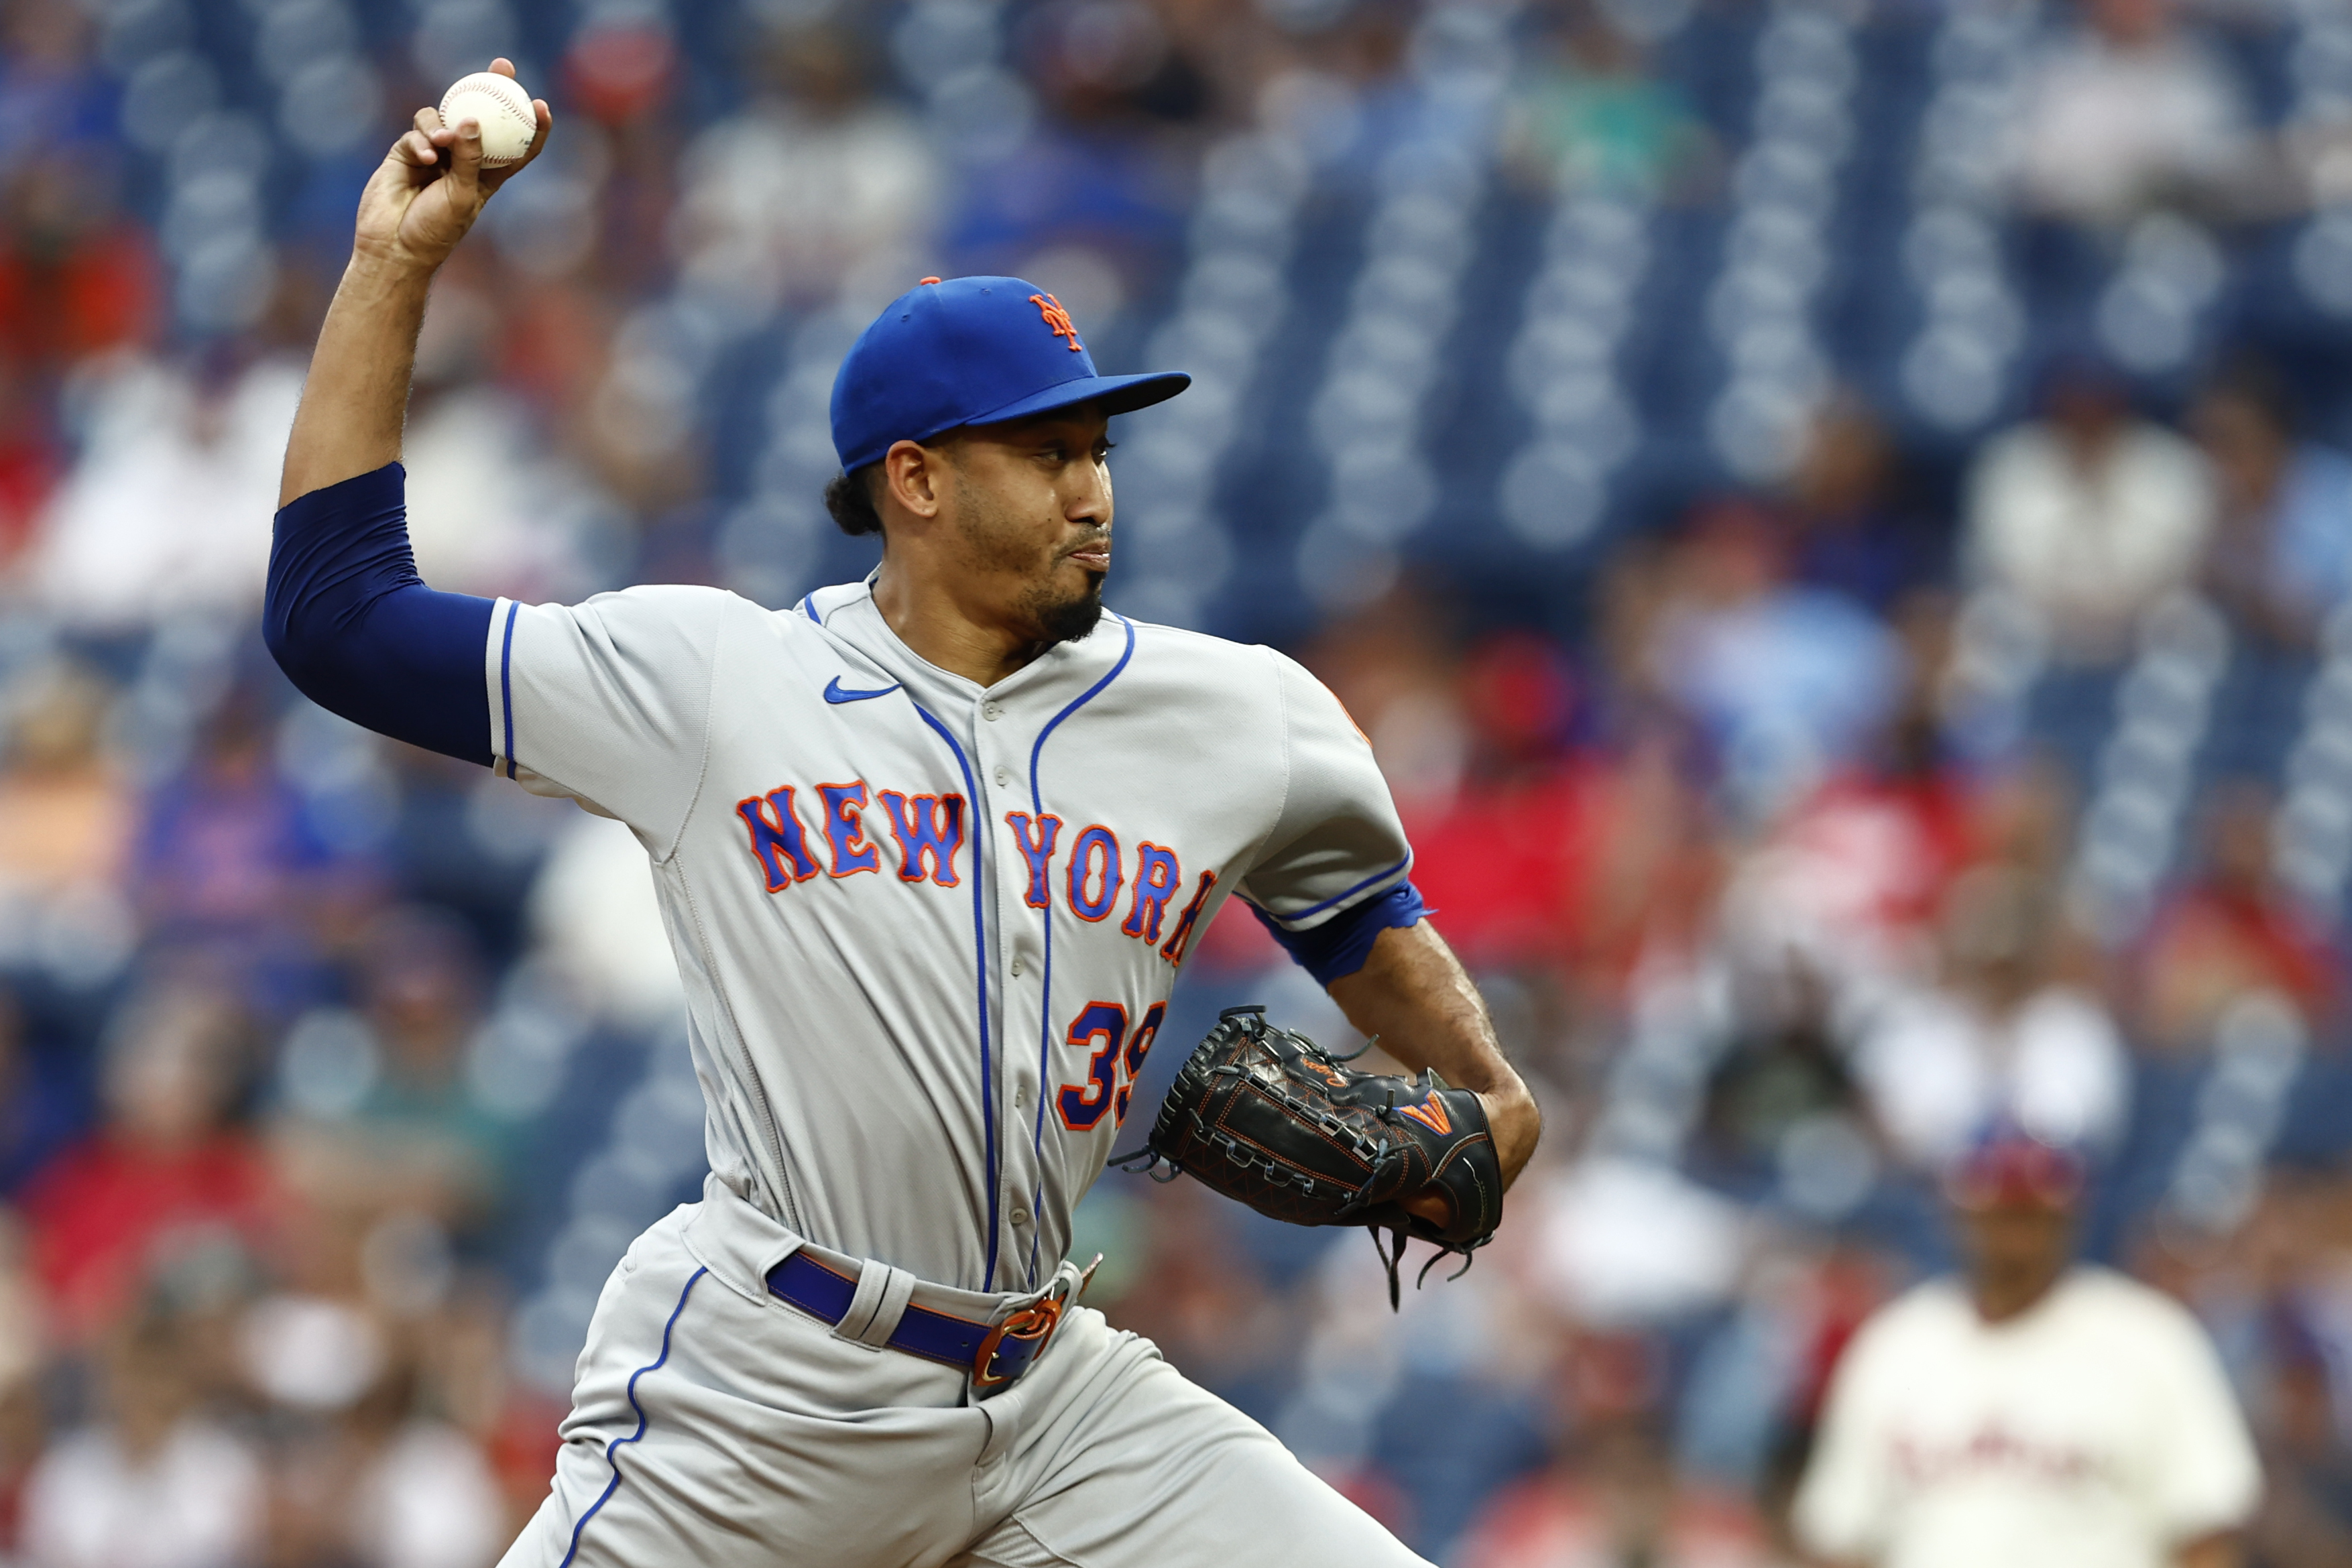 Edwin Diaz's trumpets may be performed live at upcoming Mets game